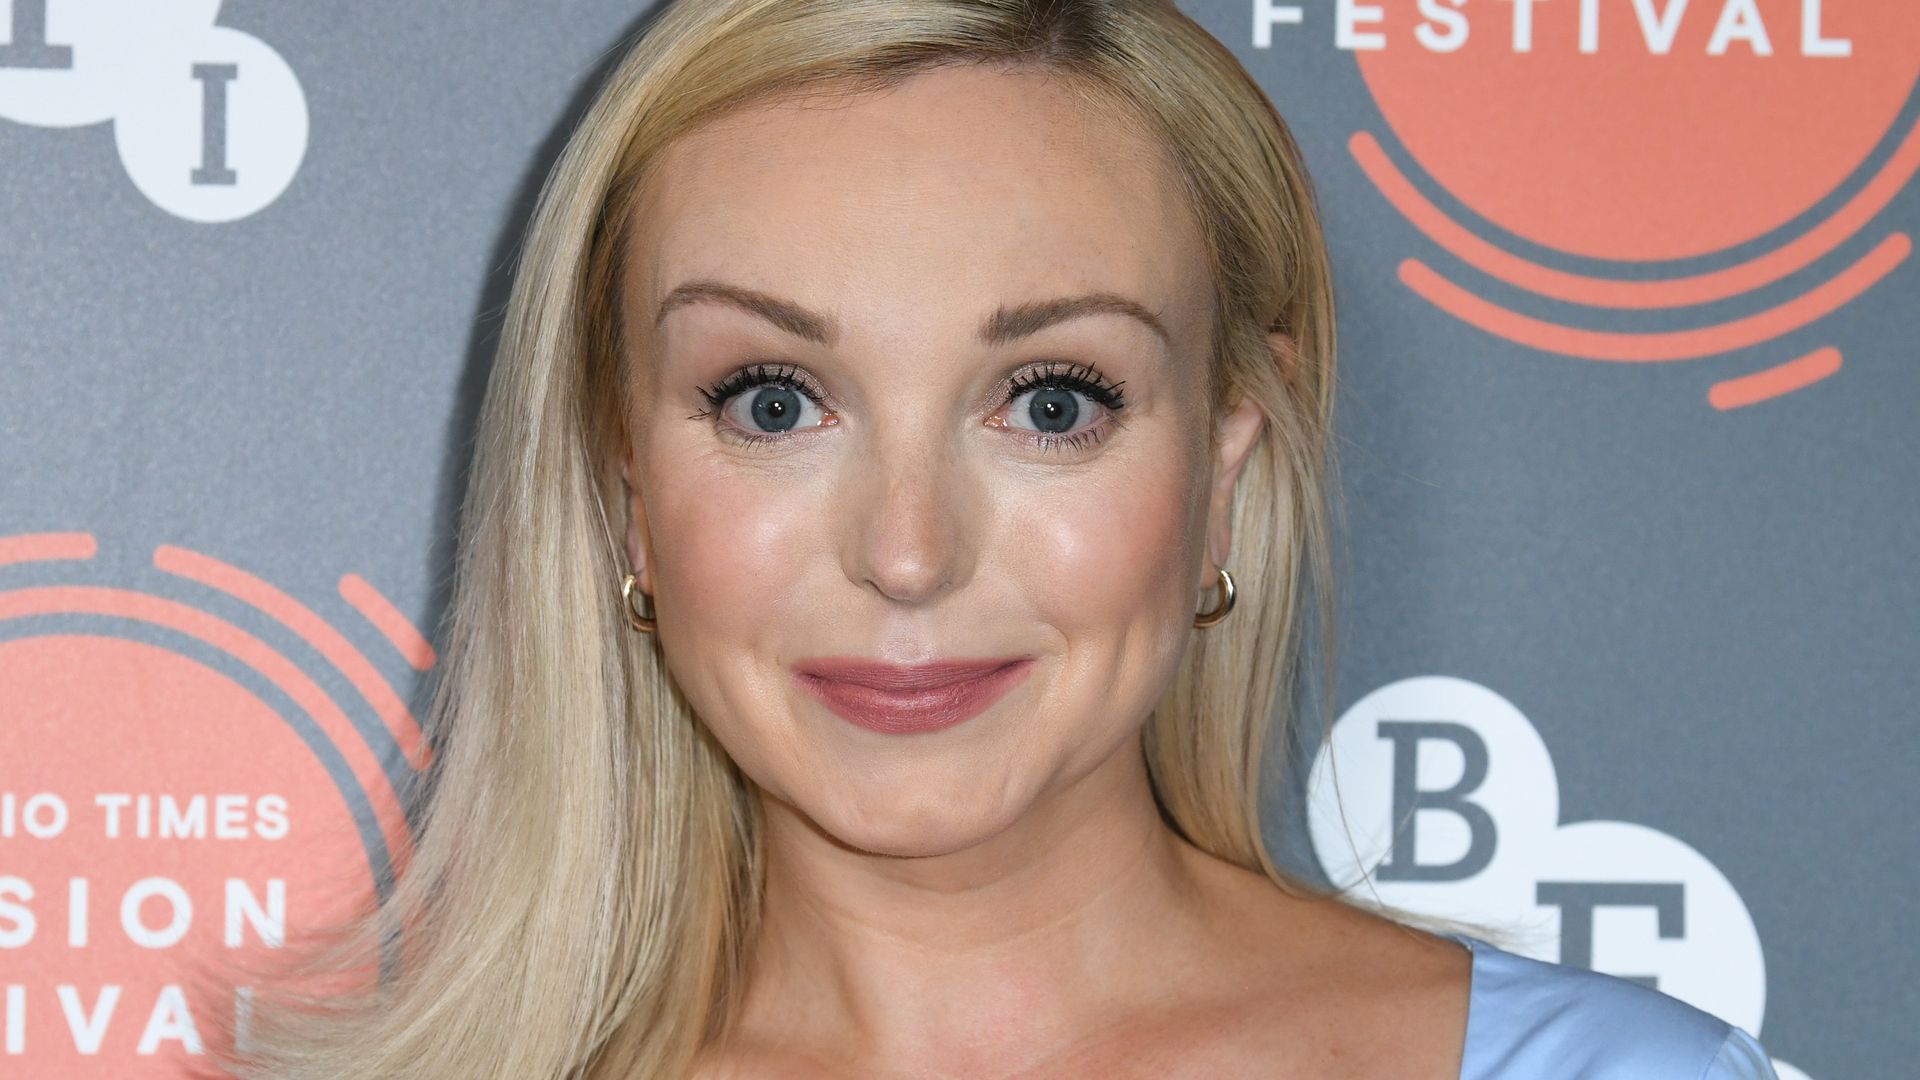 Helen George at the BFI Television Festival